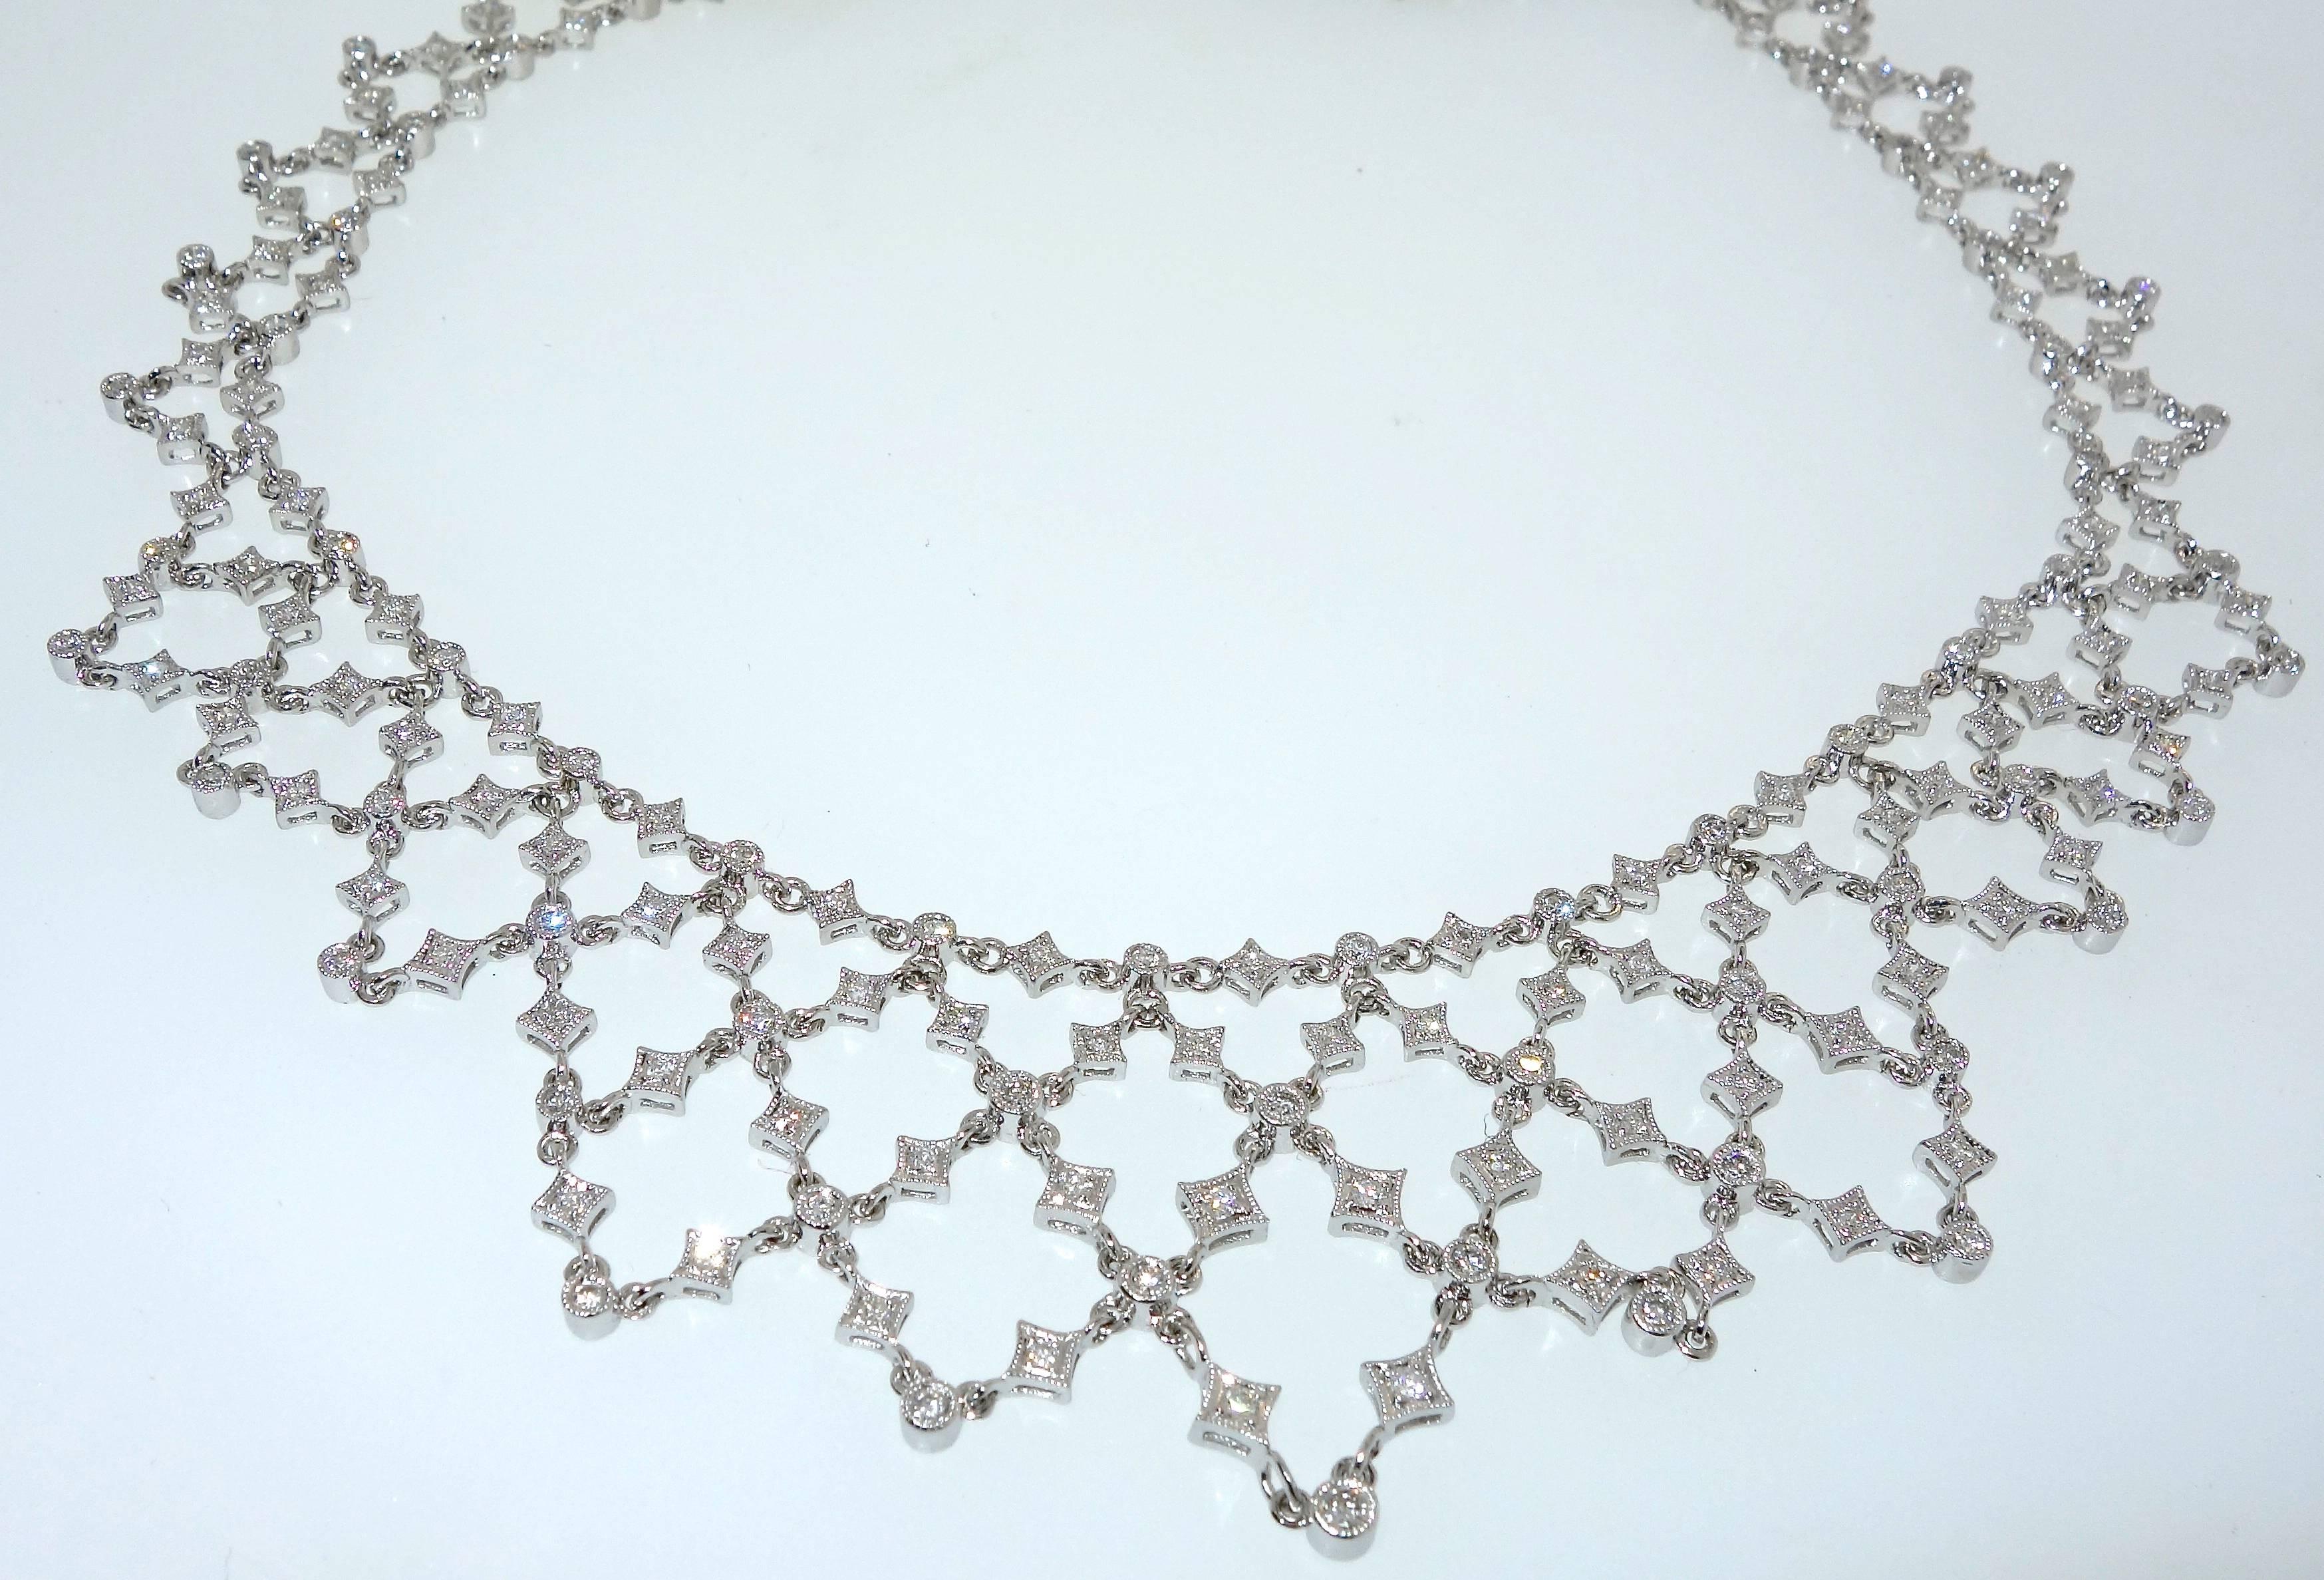 Diamonds are all well cut and well matched, they are all near colorless (H) and very slightly included (VS).  There is approximately 5.88 cts. of diamonds hand set in this elaborate yet delicate 17 inch necklace. 